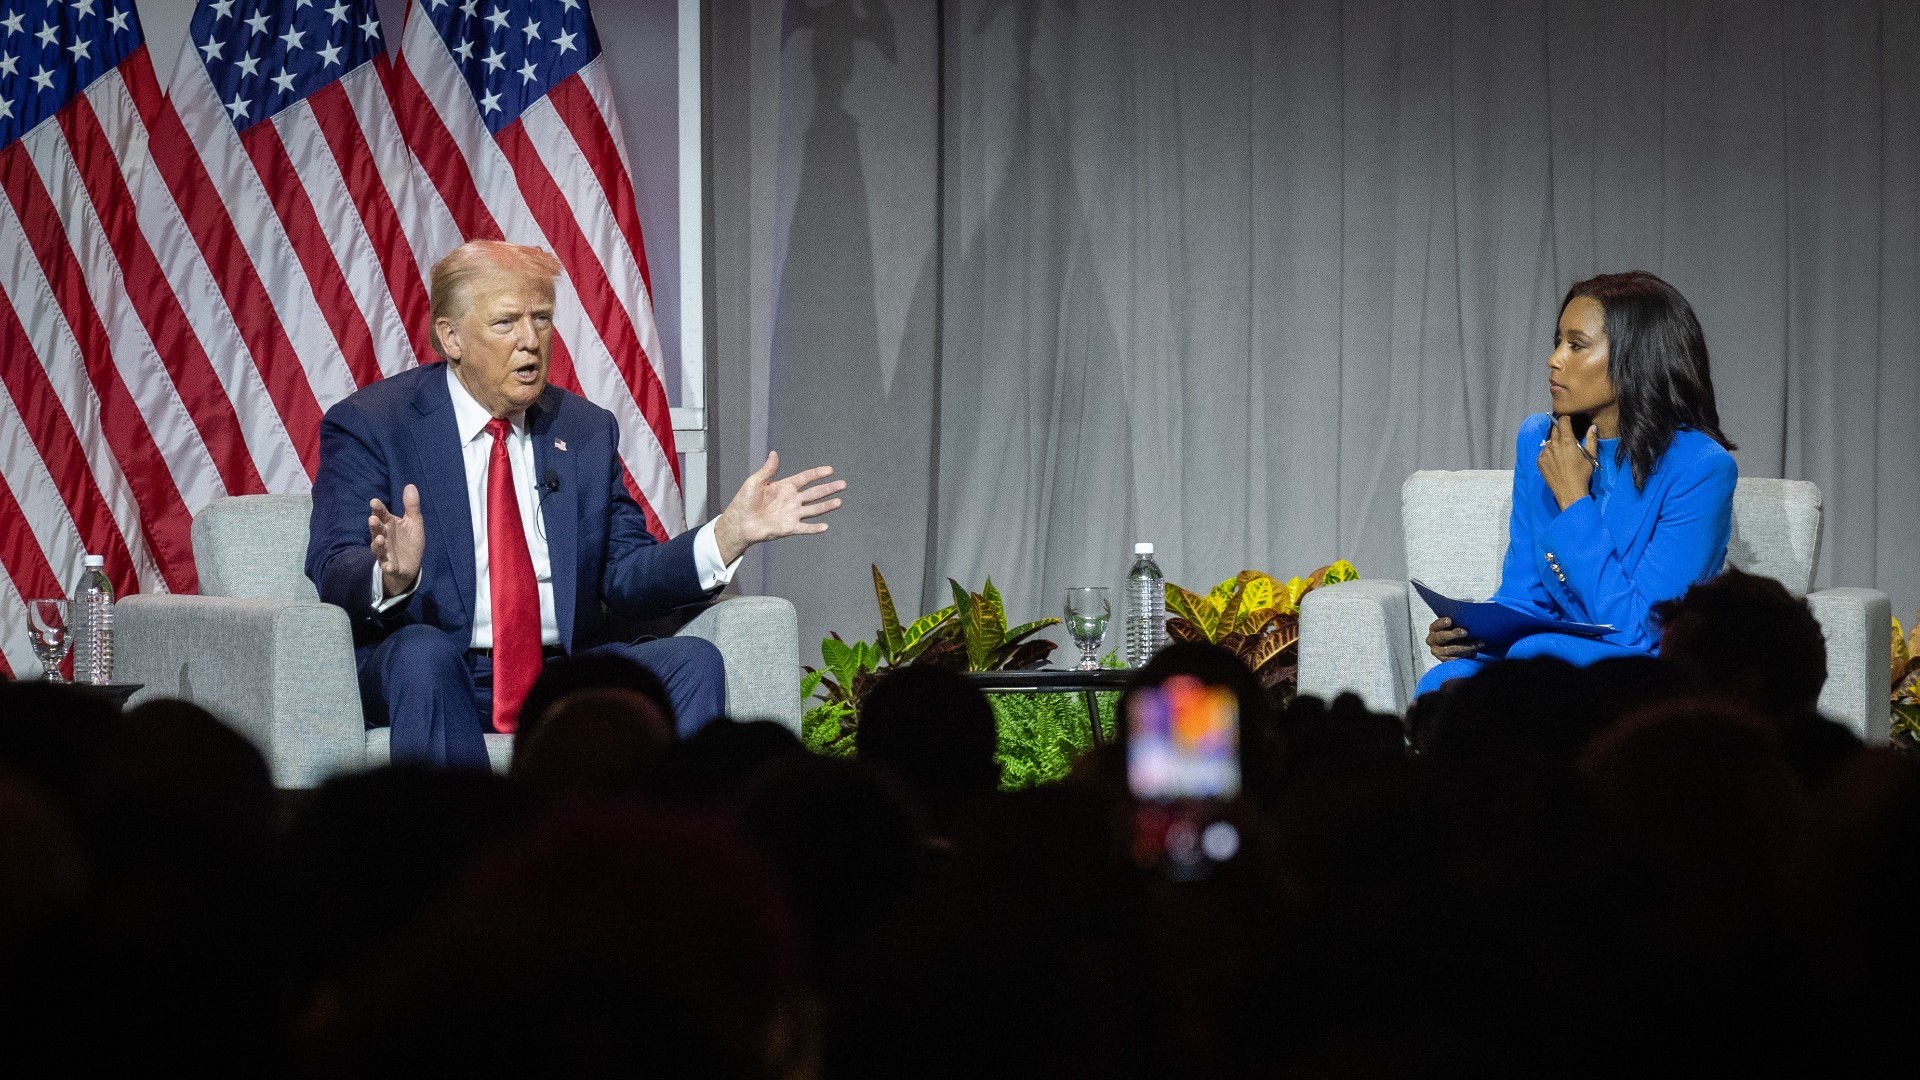  Trump questions Harris' race, clashes with journalists  